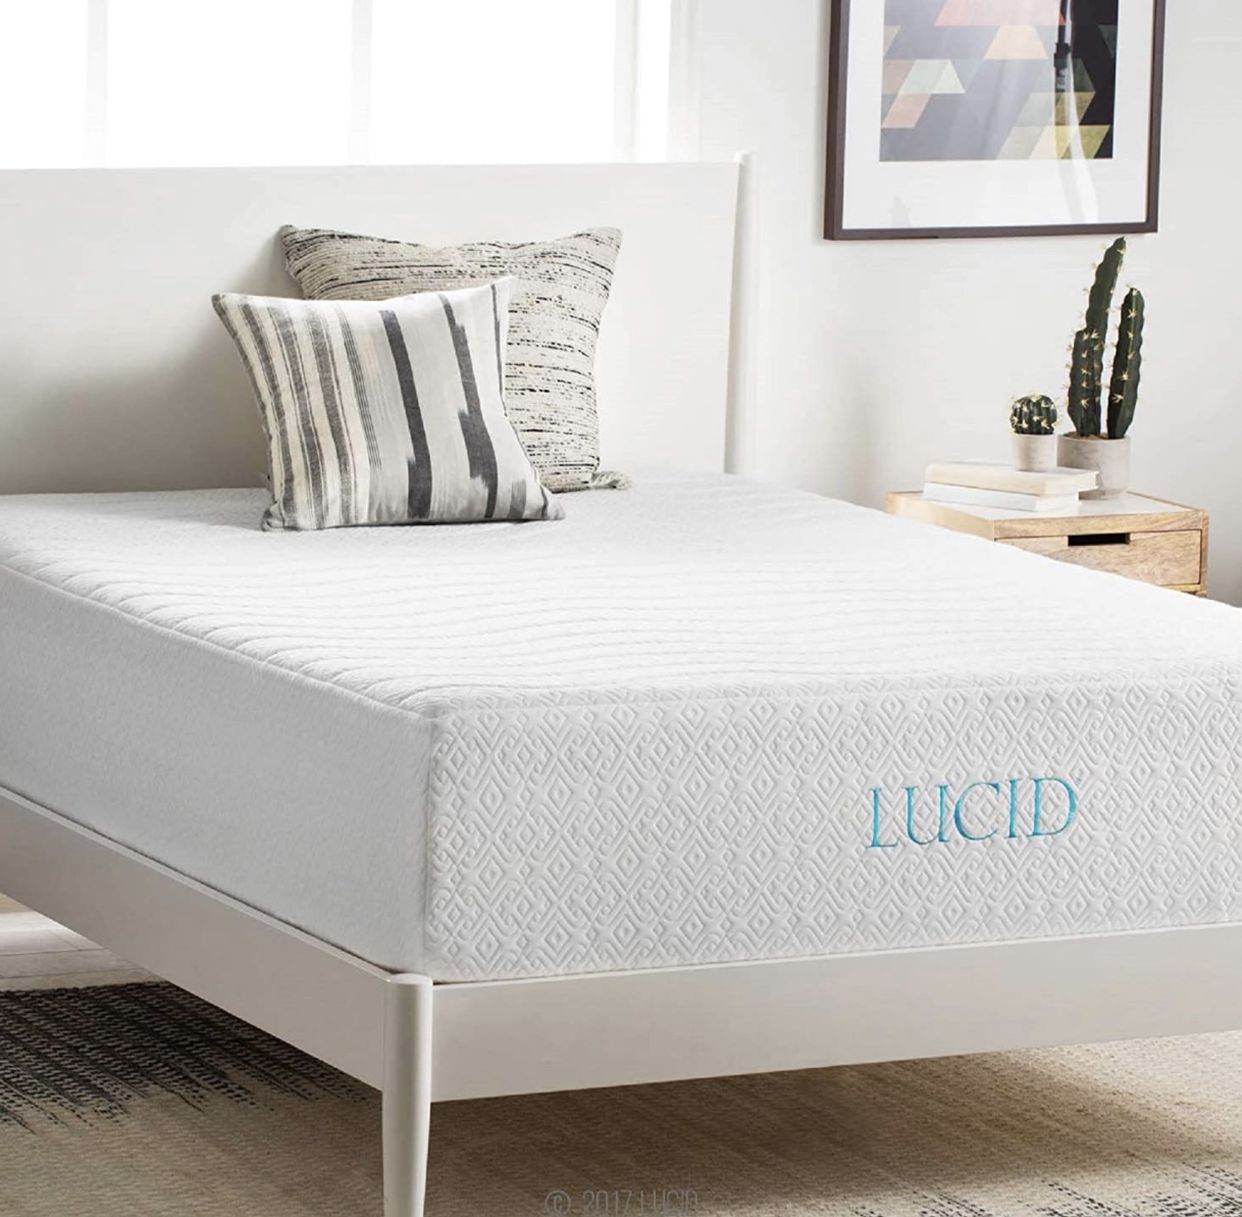 LUCID 14 Inch Memory Foam Bed Mattress Conventional, Queen, Medium with 2 Serta Cooling pillows